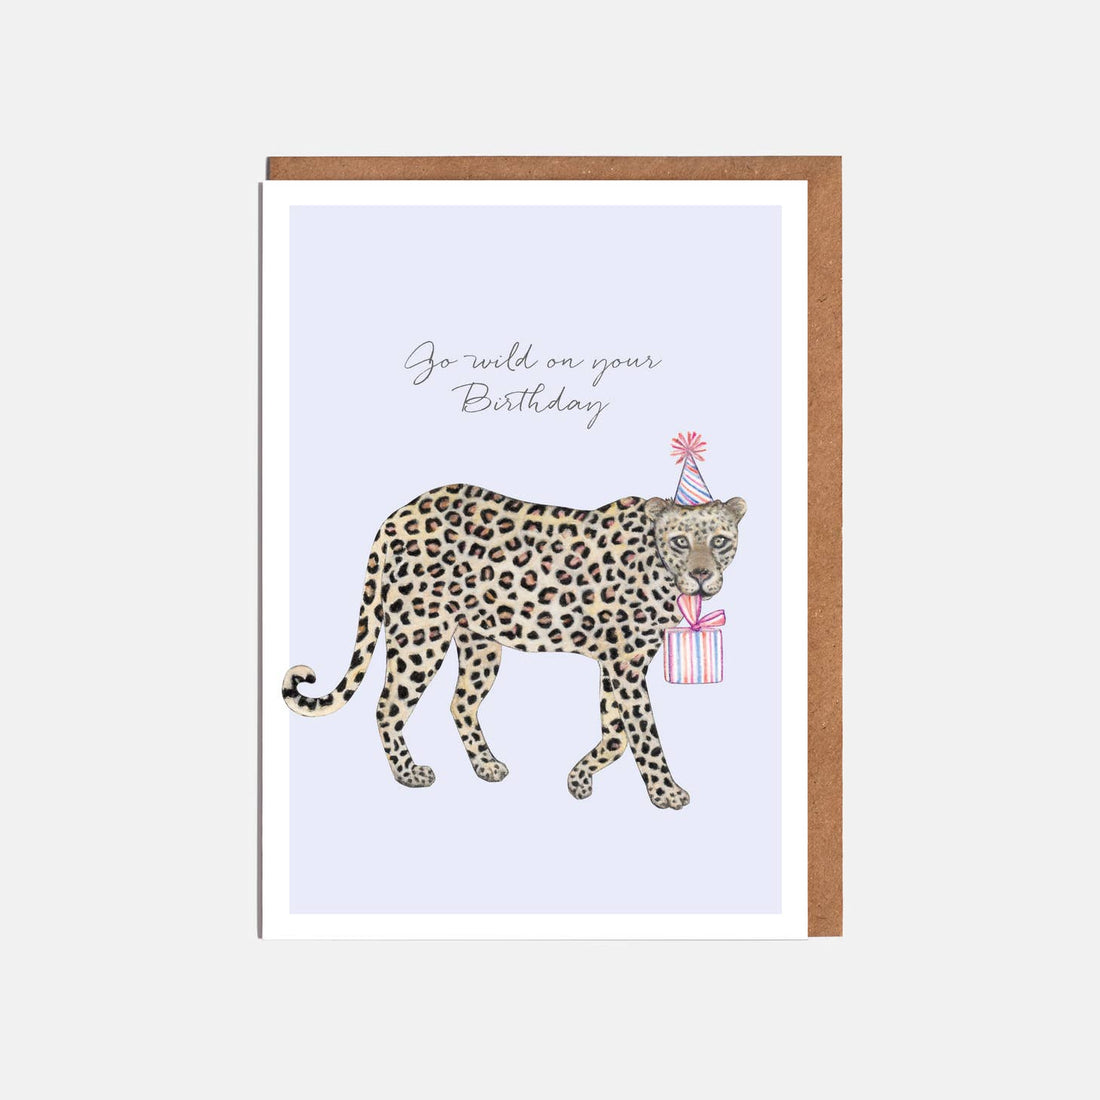 A Leopard Birthday Card featuring an illustration of a leopard carrying a gift, printed on FSC certified paper by Lottie Murphy.